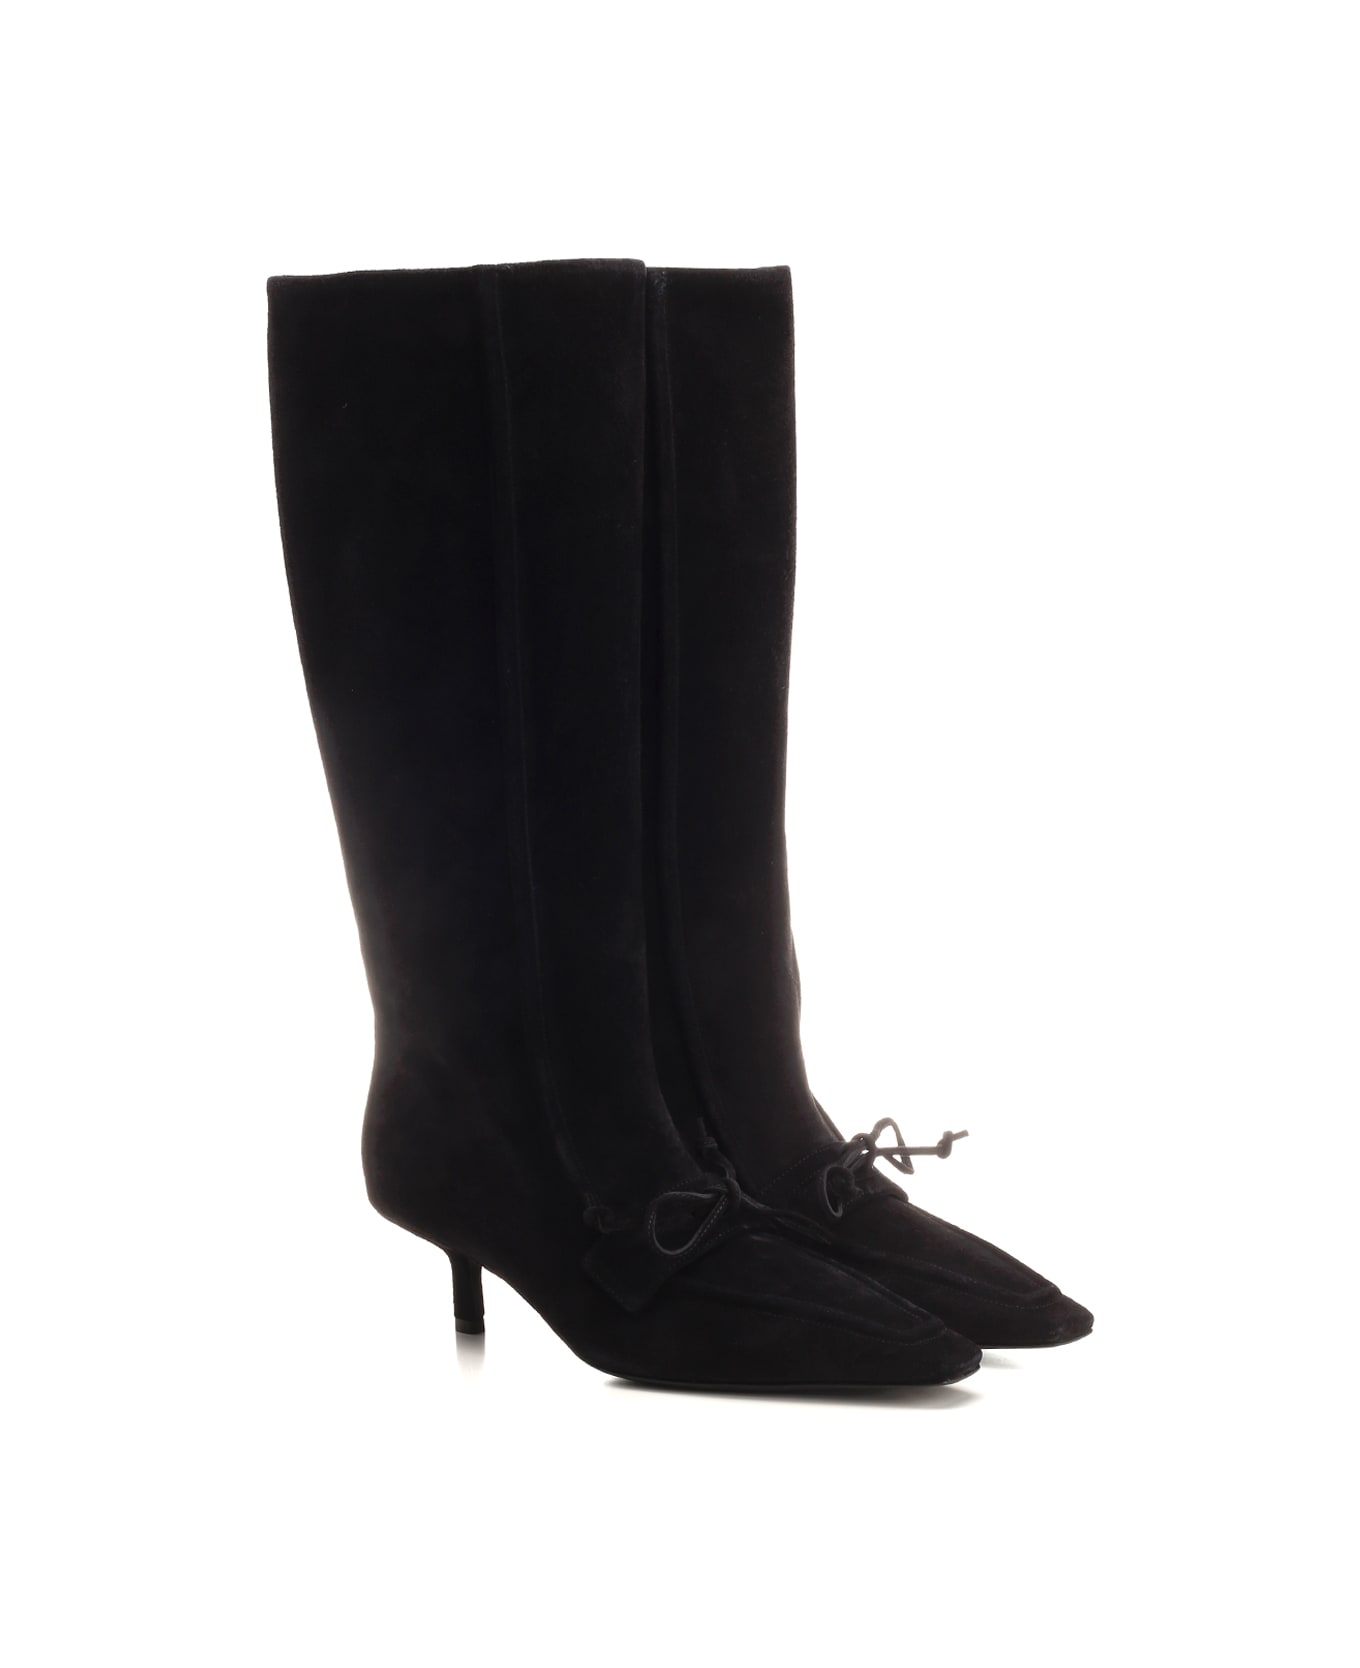 Burberry 'storm' Black Suede Boots - BLACK ブーツ